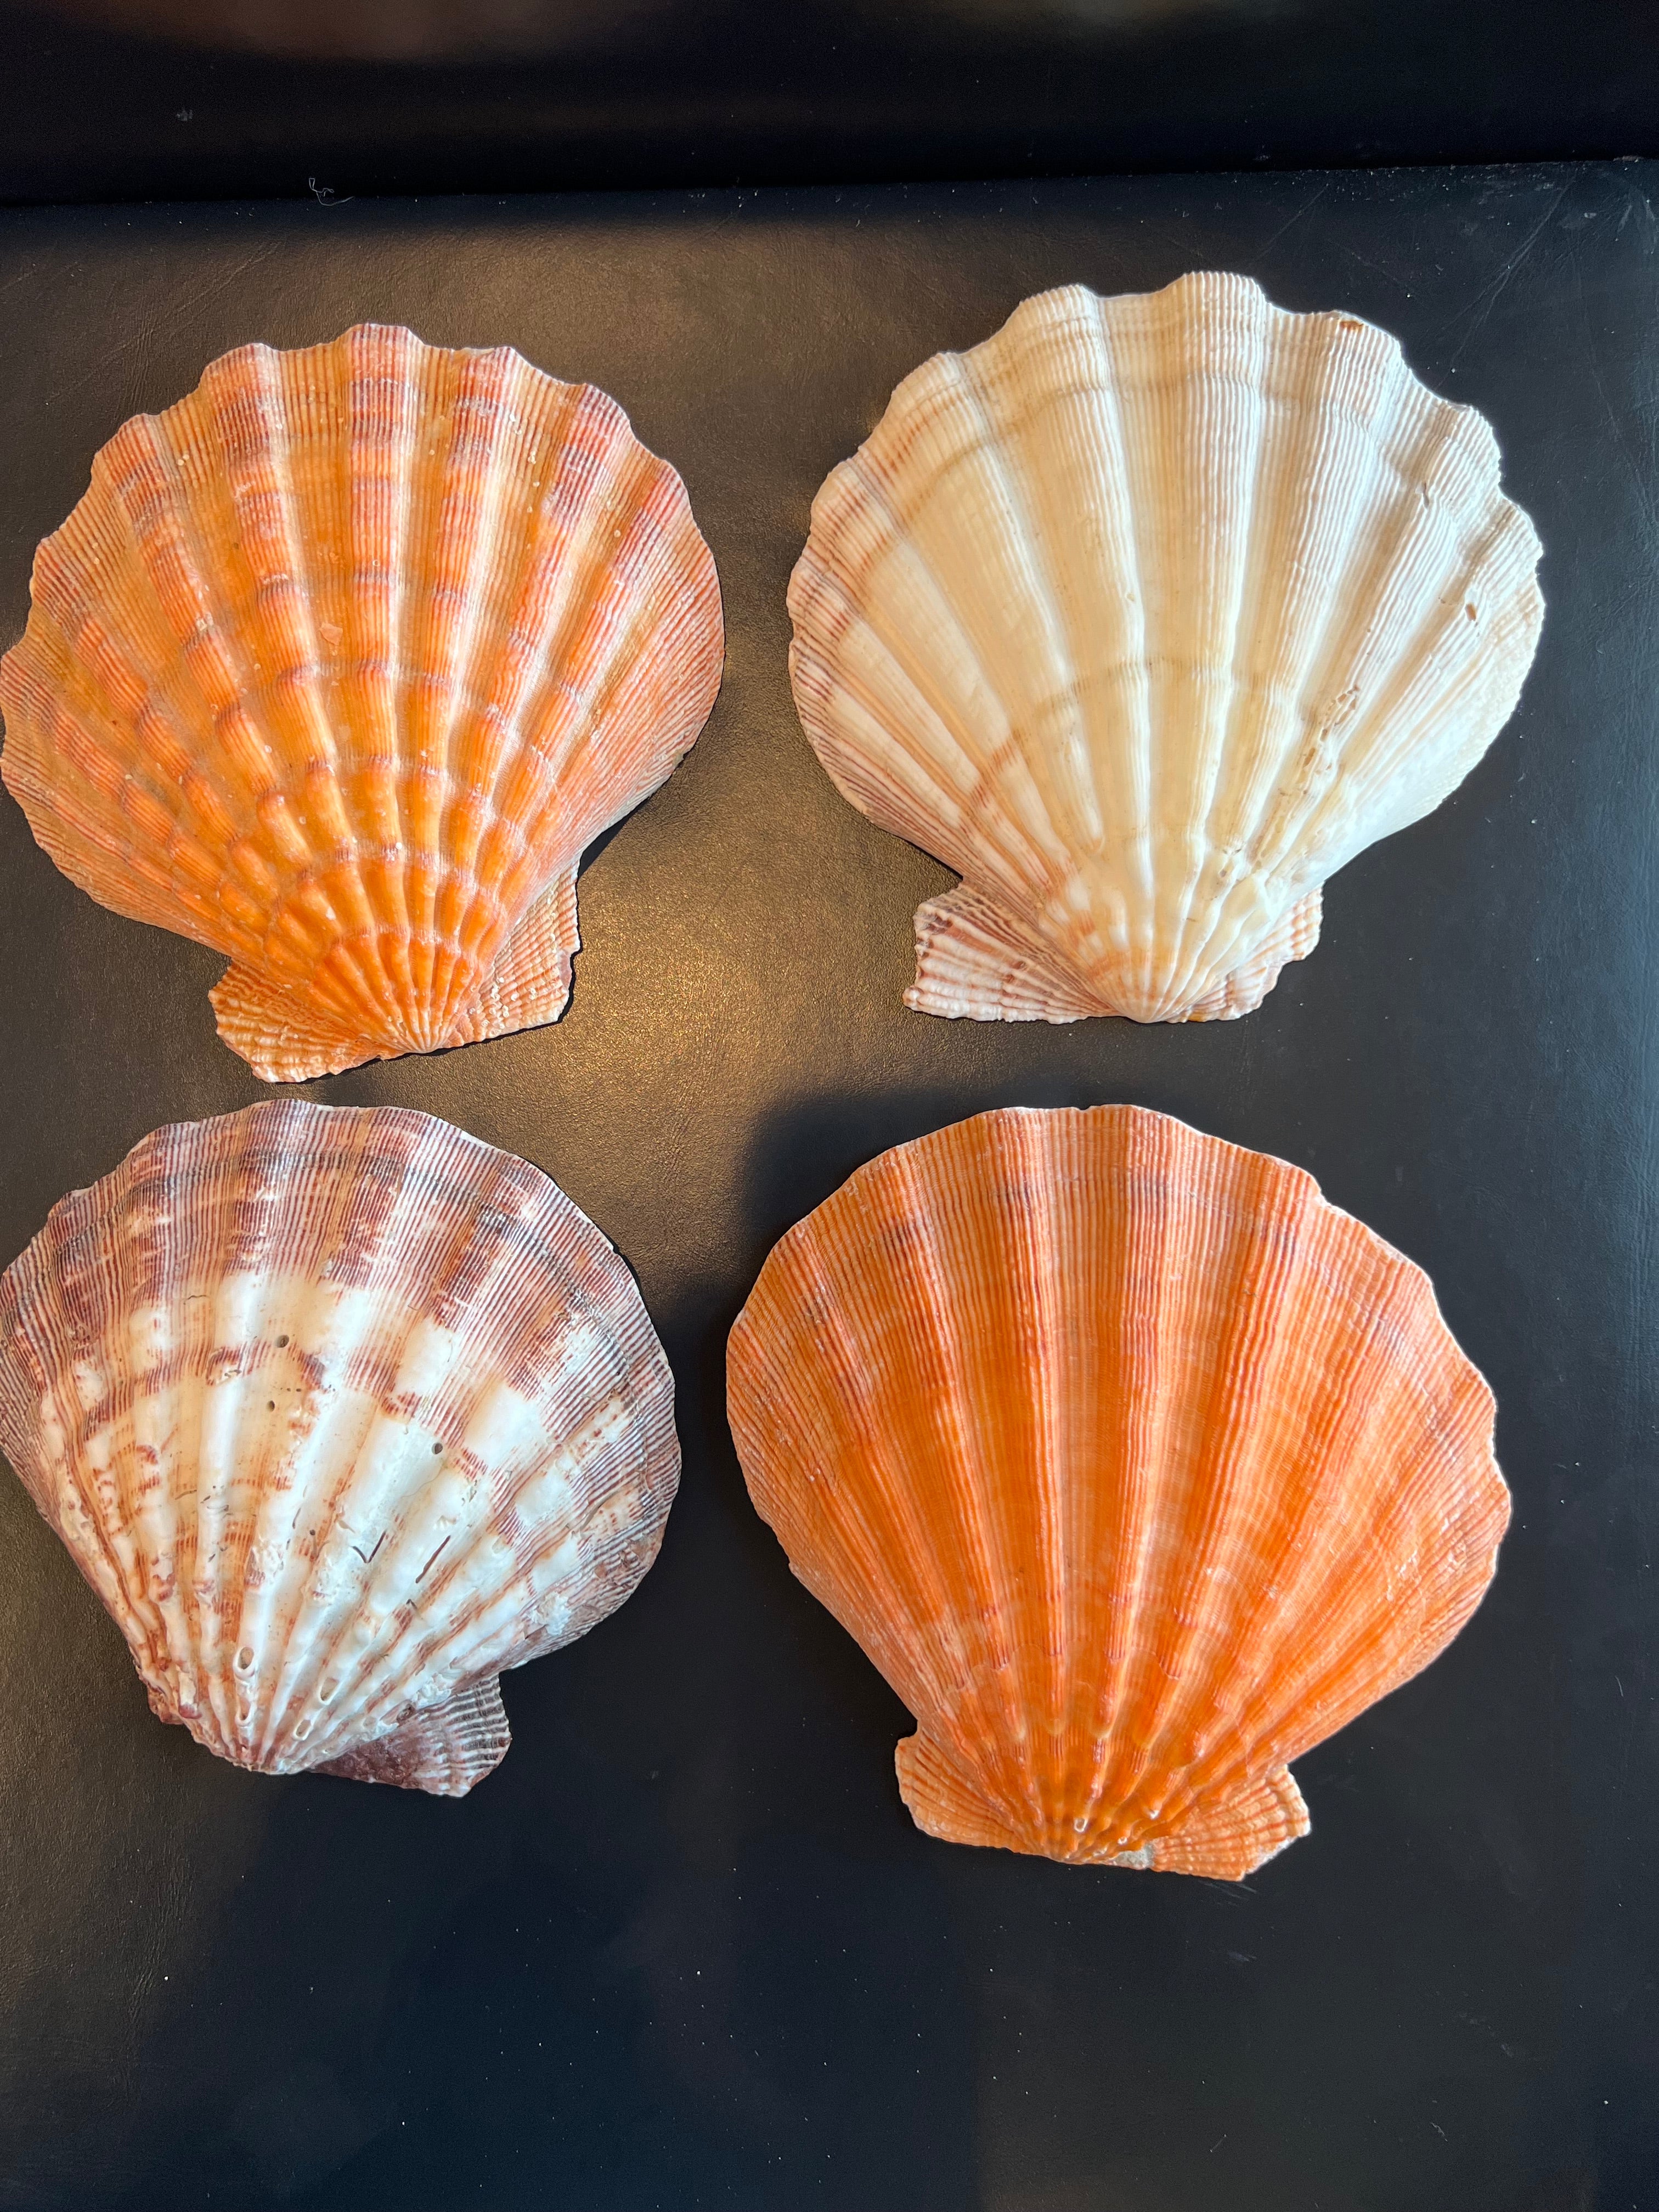 scallop shells many varieties and sizes